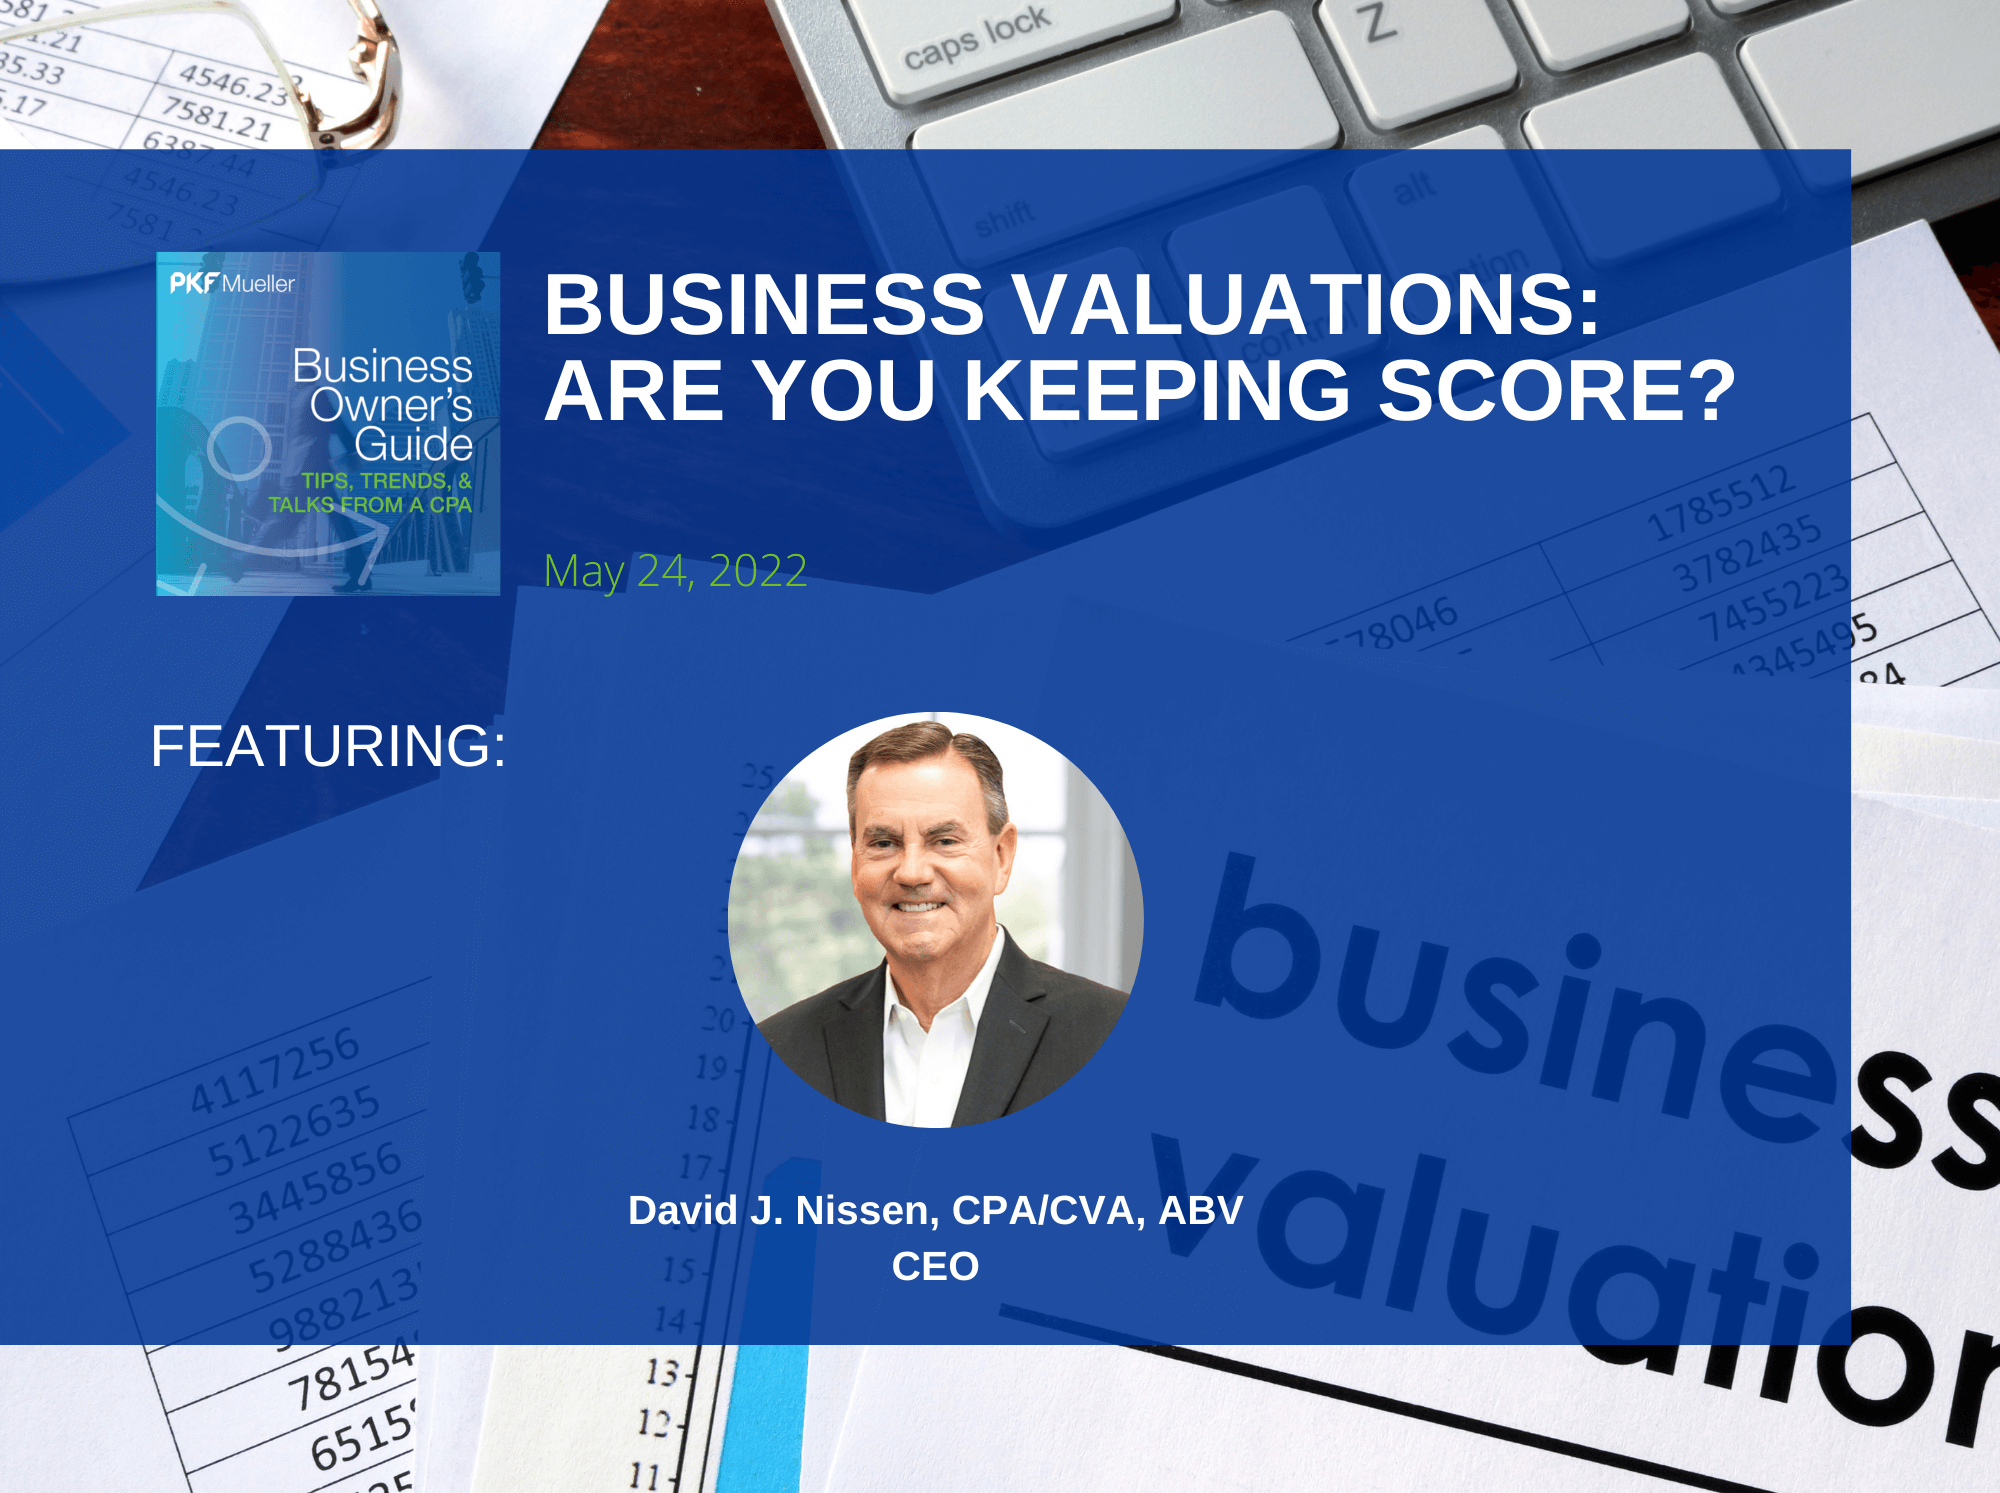 Business Valuations - Are You Keeping Score? - PKF Mueller Podcast